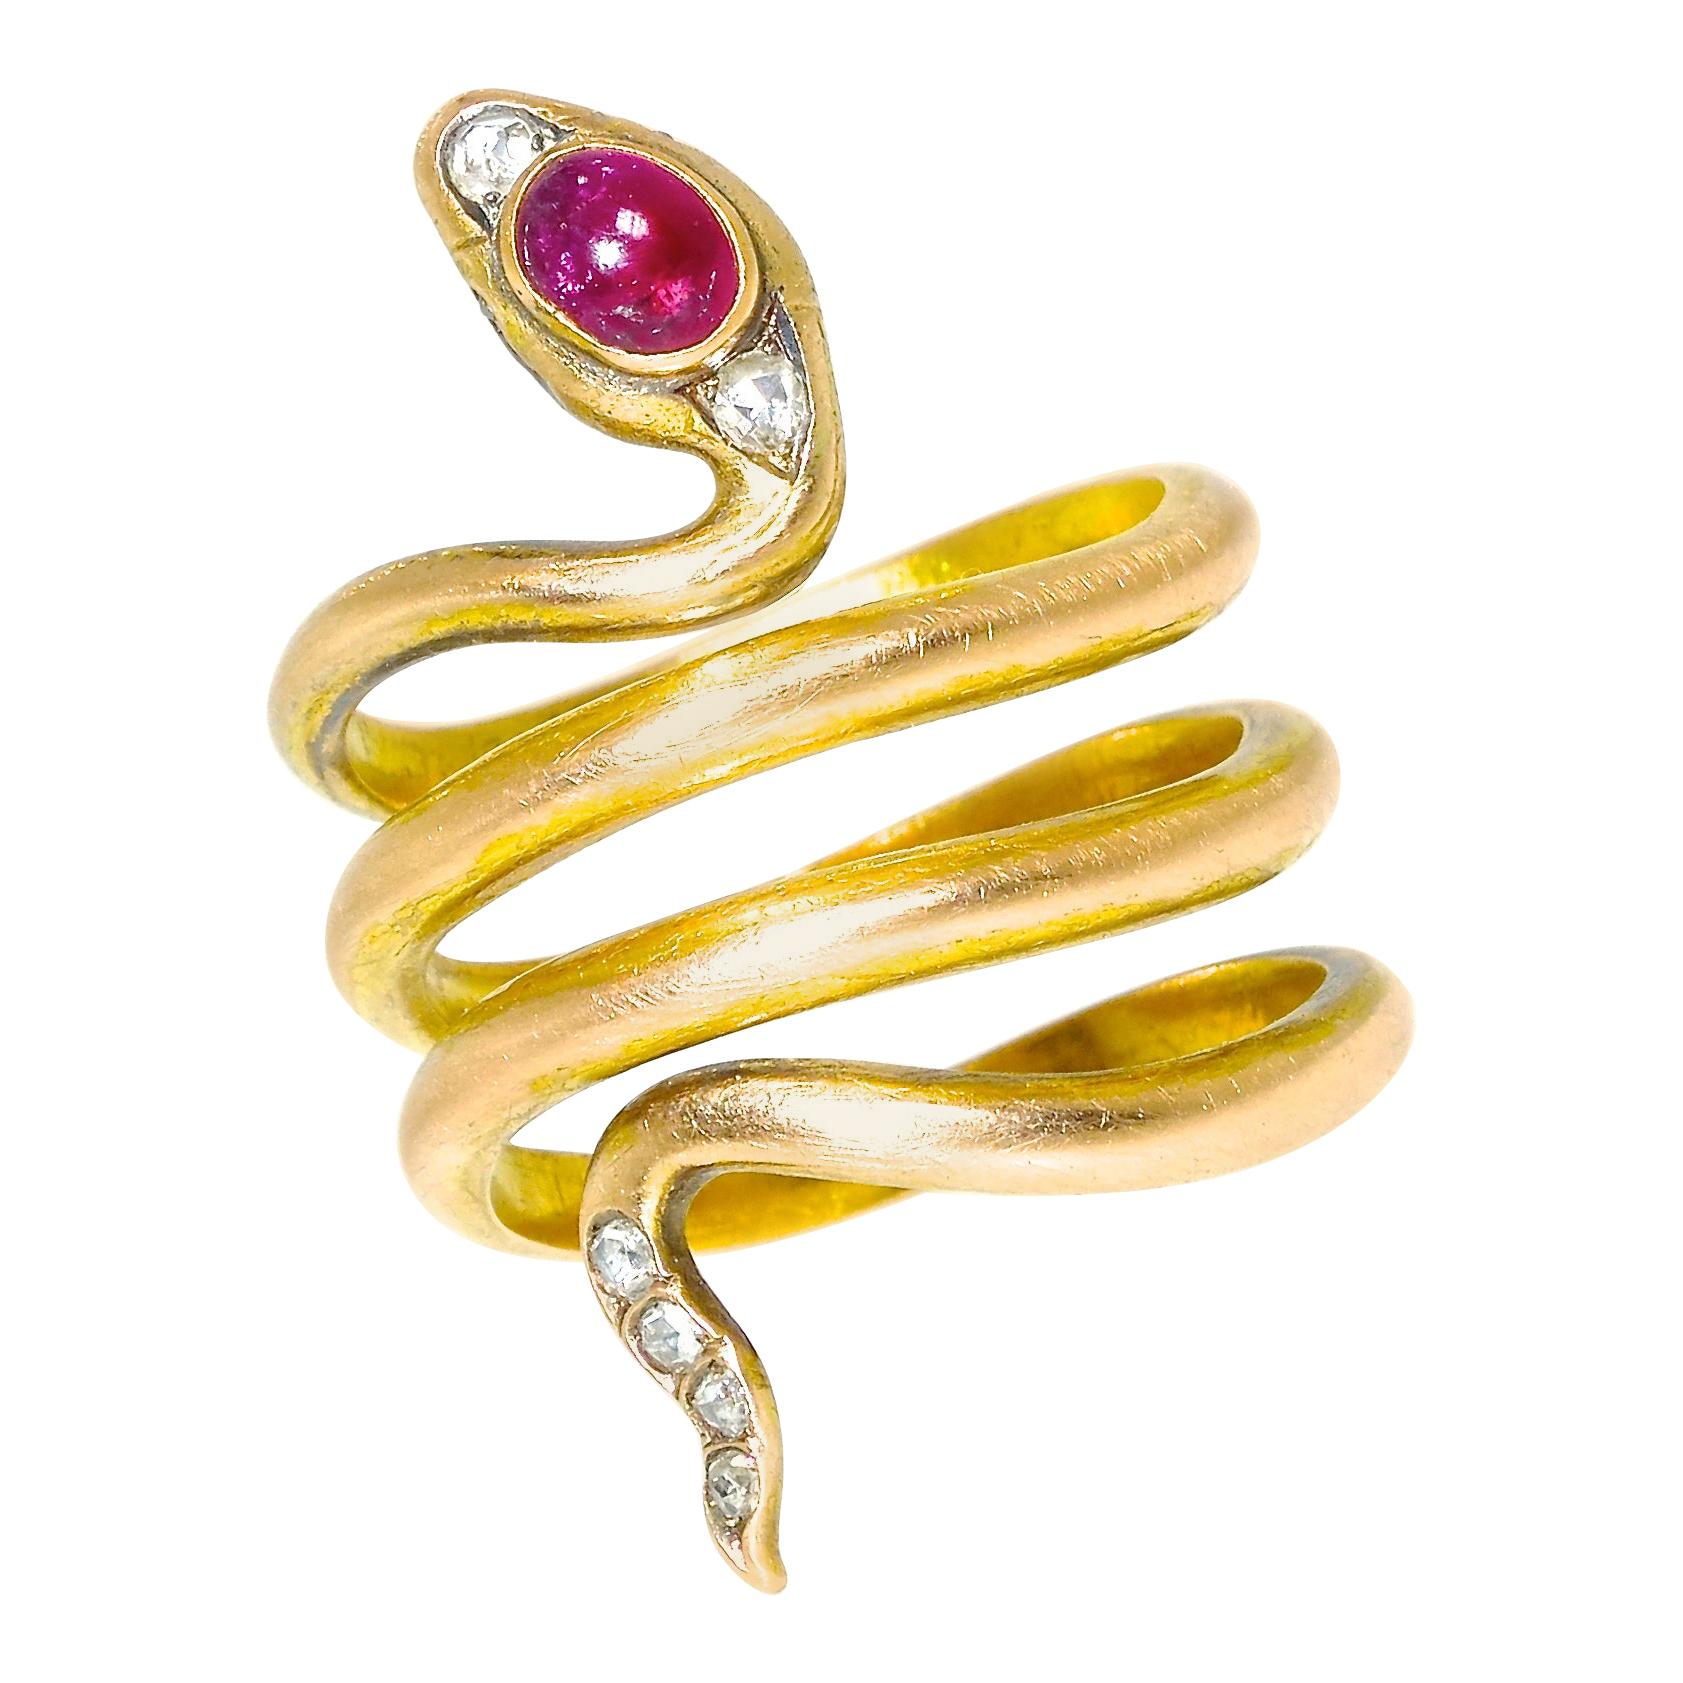 Antique Russian Gold Snake Ring, K. Faberge, circa 1895